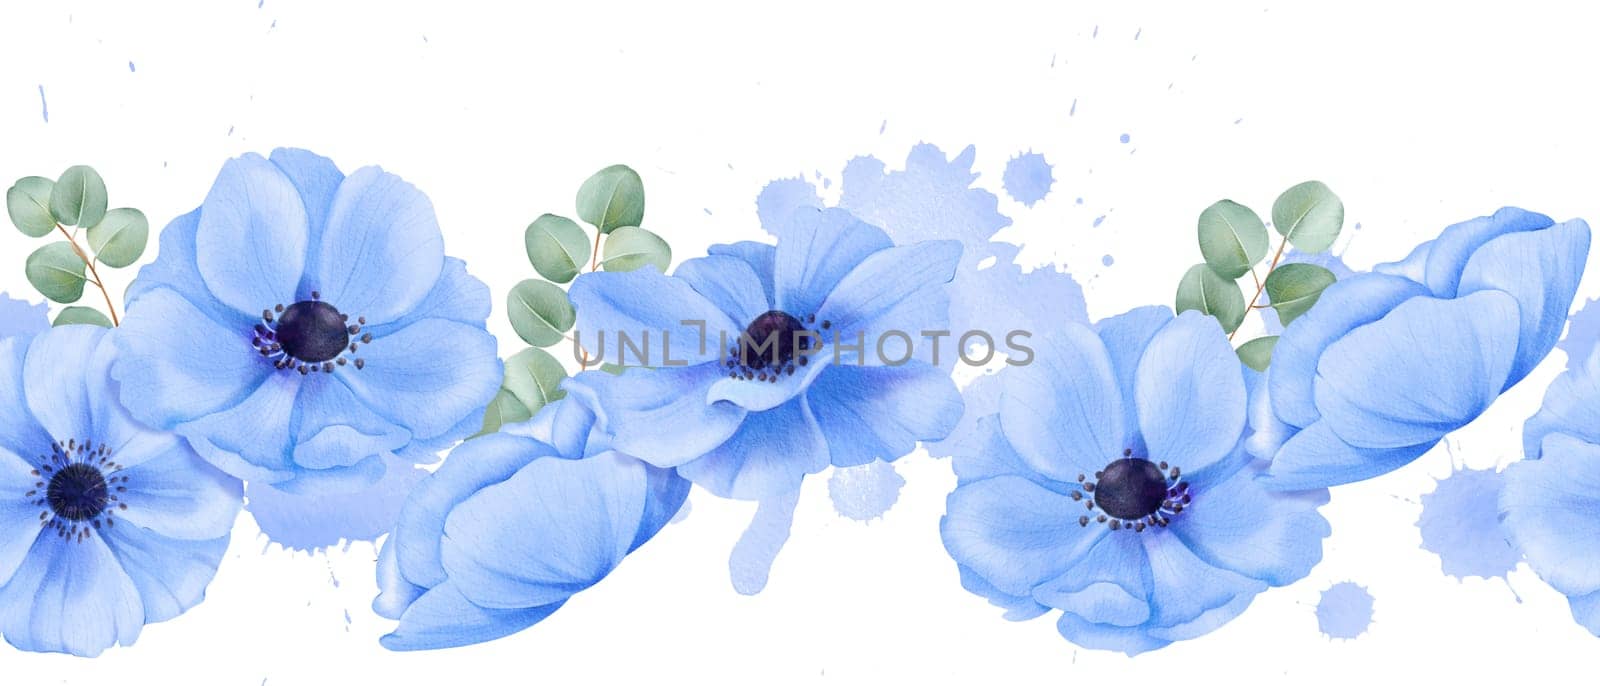 A seamless border featuring delicate blue anemones and eucalyptus leaves. watercolor illustration for digital backgrounds, scrapbooking stationery design or social media graphics by Art_Mari_Ka